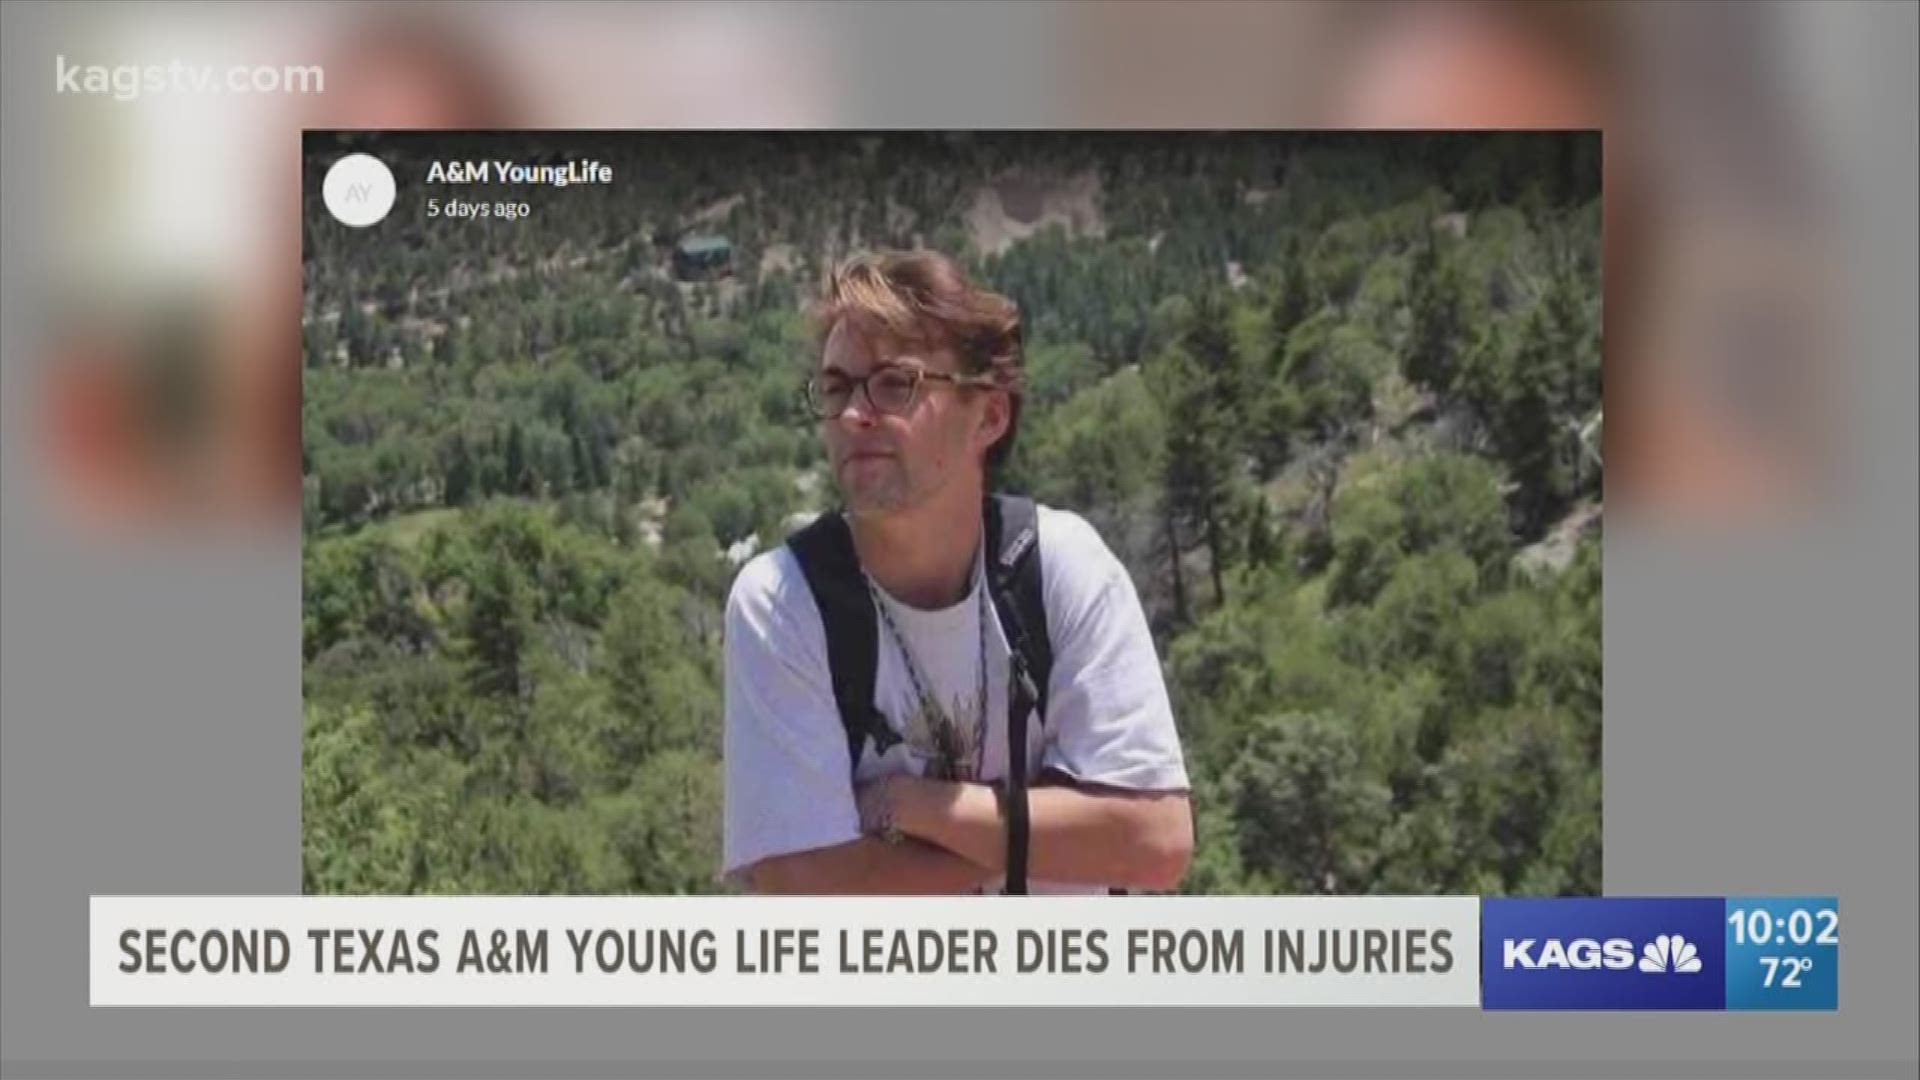 Blake Rodgers, one of the Brazos Valley Young Life leaders injured in a recent car crash, has passed away. He was one of five on their way to a Young Life camp in Colorado.